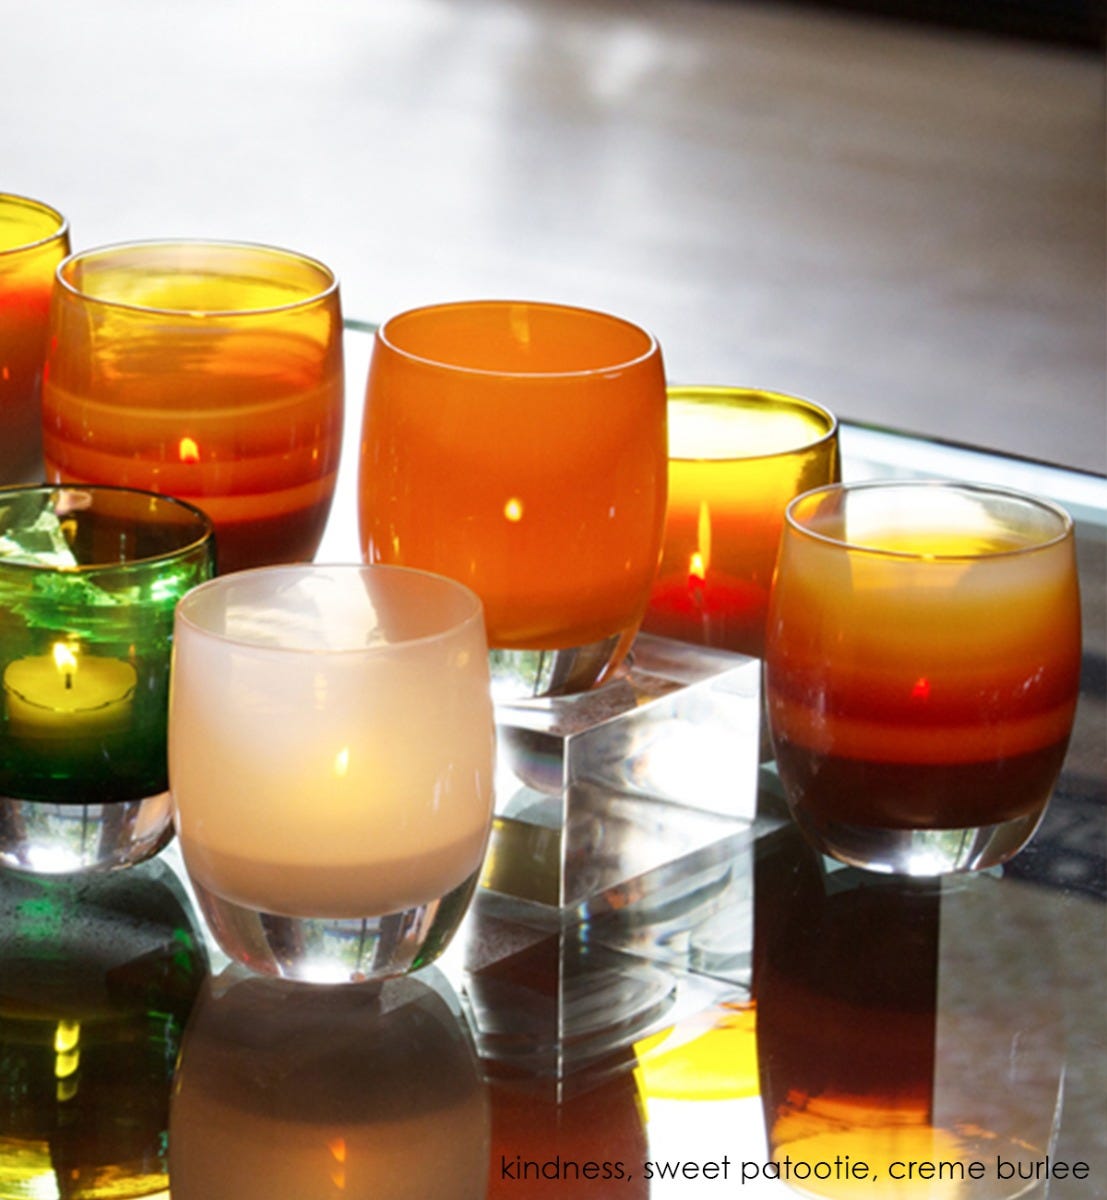 sweet patootie, apricot orange, hand-blown glass votive candle holder. Paired with kindness and creme brûlée